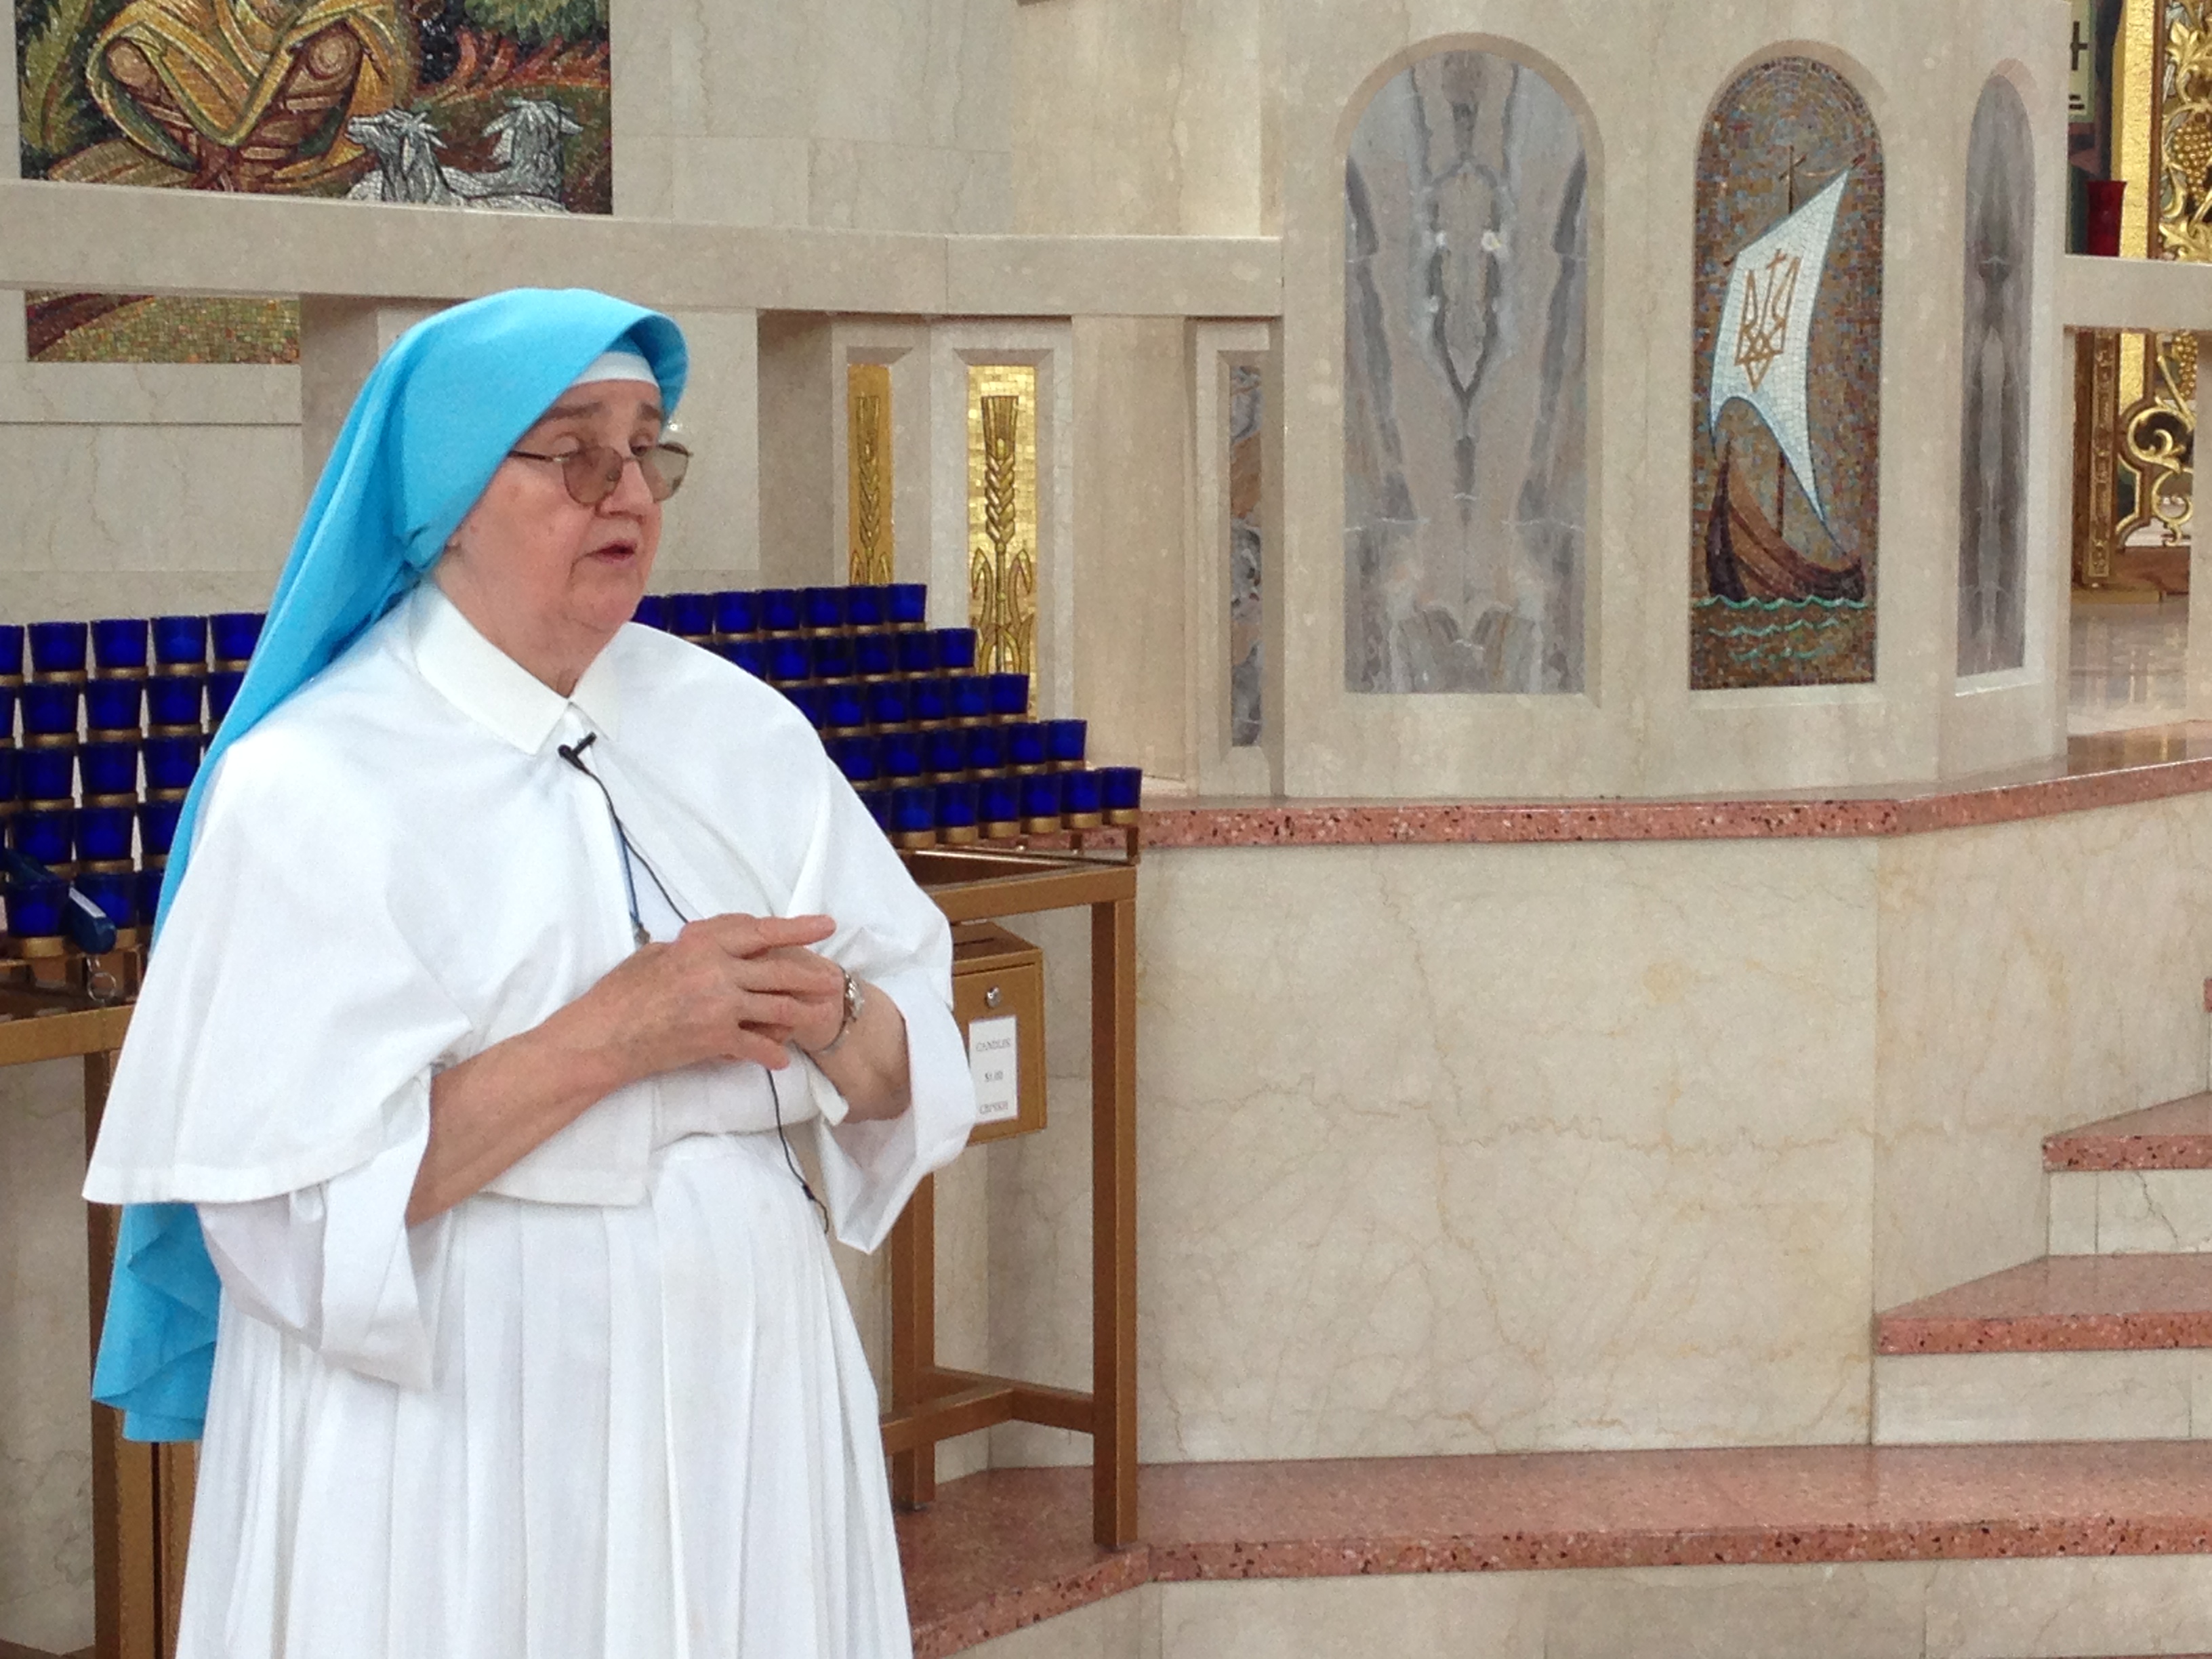 Sister Evhenia Prusnay in the Ukrainian Catholic Cathedral of the Immaculate Conception during a tour.